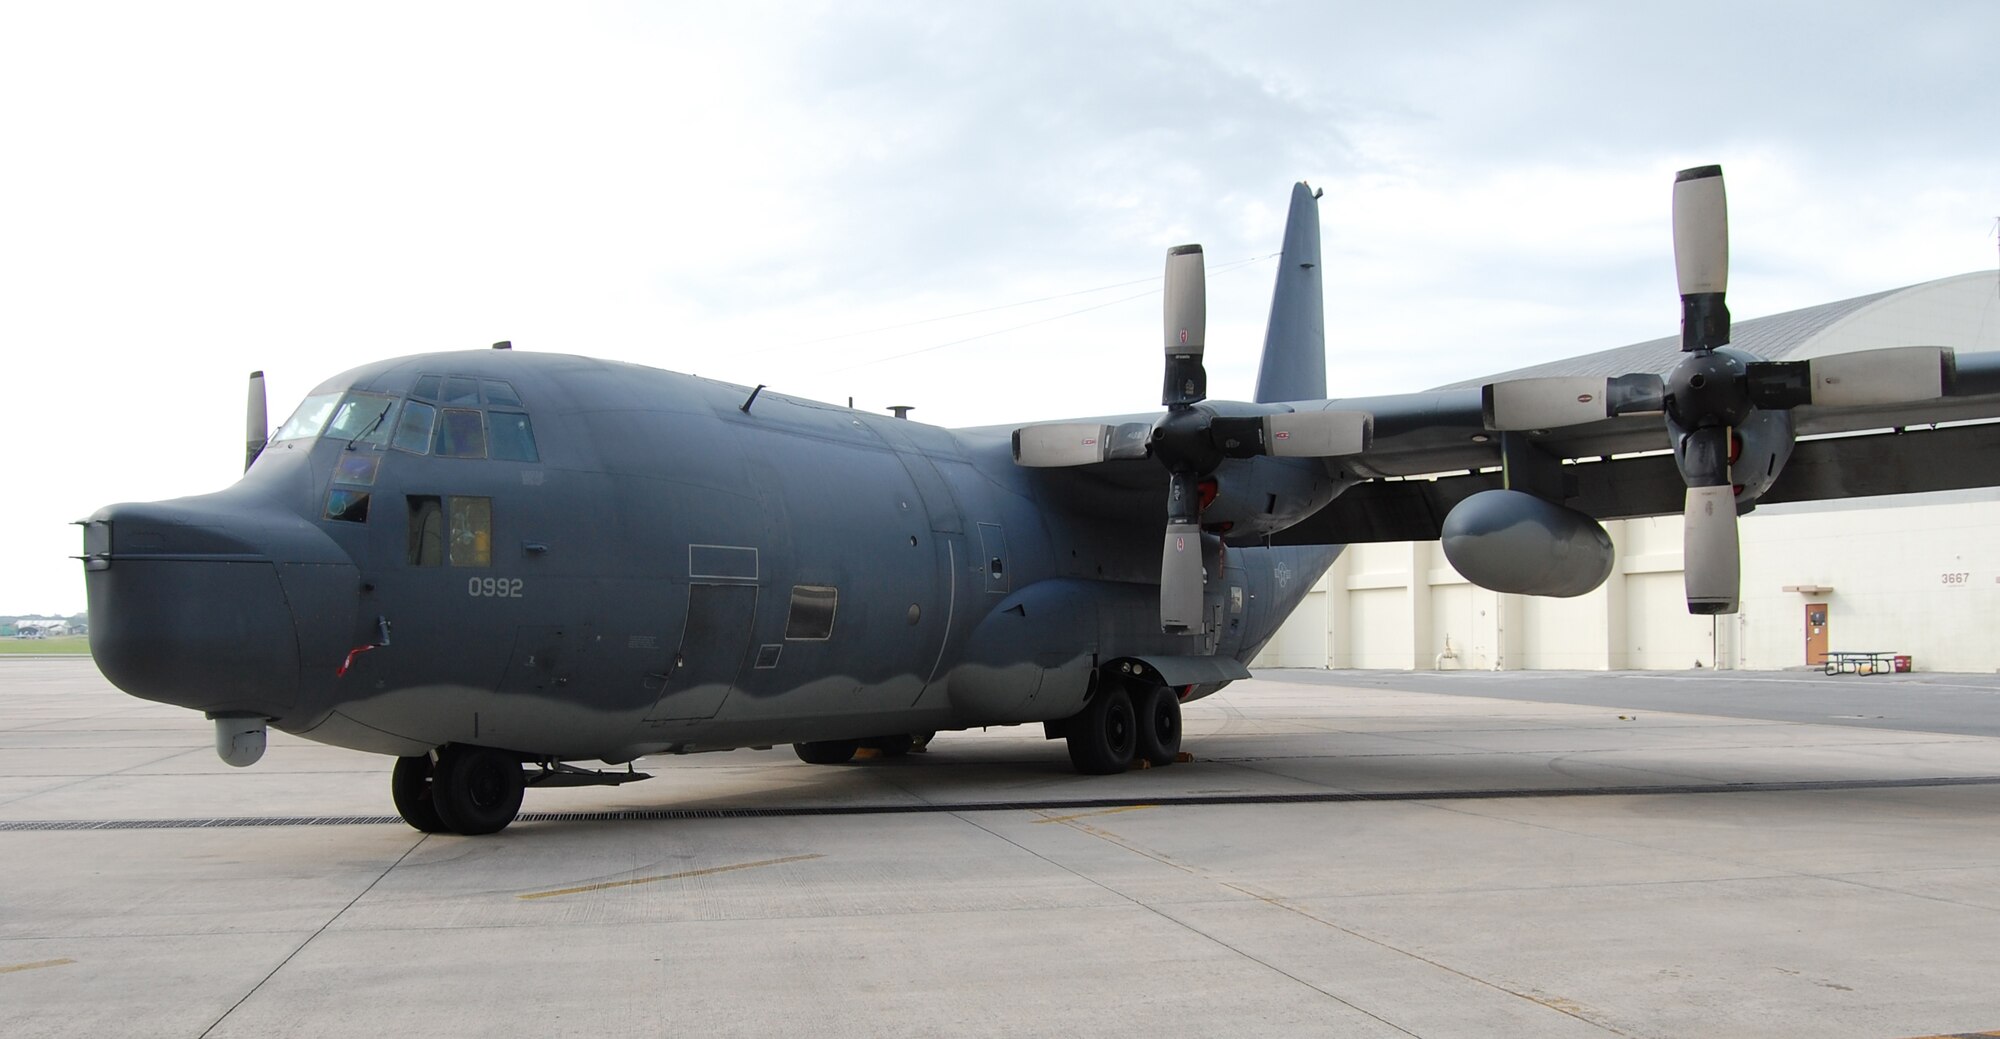 KADENA AIR BASE, Japan -- The 17th Special Operations Squadron's MC-130P Combat Shadow Tail # 65-0992 sits on the ramp at Kadena Air Base July 23, 2009. Tail # 65-0992 has been assigned to the 17th SOS since its activation at Kadena Aug. 1, 1989. The aircraft has been stationed at Kadena since February 1988, originally assigned to the 33rd Aerospace Rescue Squadron.  (U.S. Air Force photo by James D'Angina)